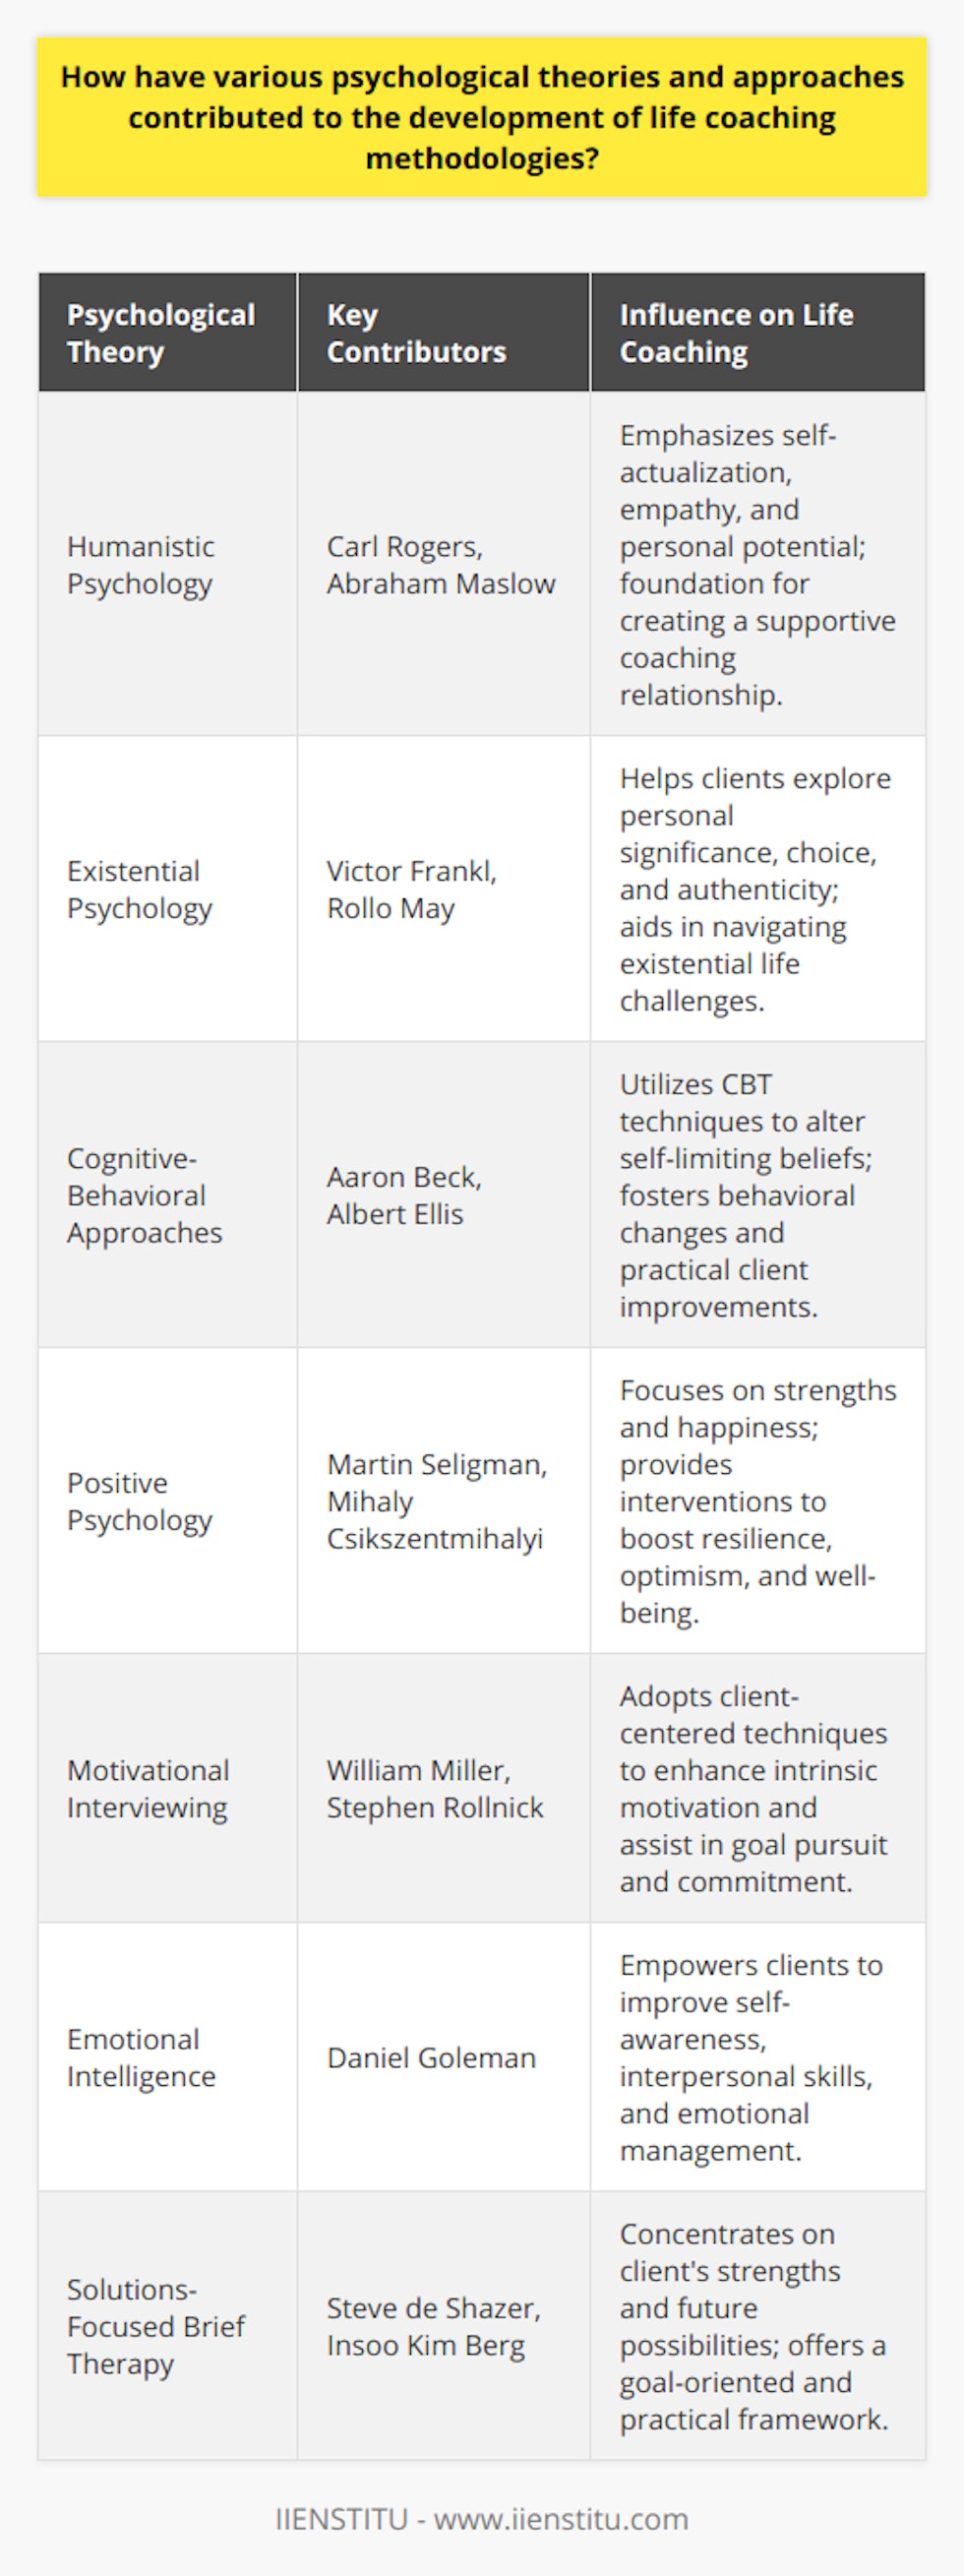 Life coaching has emerged as a transformative practice that integrates various psychological principles to help individuals achieve their personal and professional objectives. The development of life coaching methodologies has been profoundly influenced by a fusion of psychological theories, shaping a nuanced and robust approach to facilitating personal growth and fostering self-improvement. Here are some core psychological underpinnings that have informed the practice of life coaching:Humanistic PsychologyThe humanistic psychological approach, with its central focus on the individual's potential and inherent drive towards growth, has been a cornerstone in the life coaching field. Humanistic theorists, such as Carl Rogers and Abraham Maslow, stressed the importance of self-actualization, empathy, and unconditional positive regard—principles that life coaches integrate when building rapport with clients and supporting them in realizing their full potential.Existential PsychologyExistential psychology, which explores themes of meaning, choice, and the nature of existence, also contributes significantly to life coaching. By encouraging clients to confront their life choices and find personal significance in their endeavors, life coaching can help individuals navigate existential challenges and create lives imbued with purpose and authentic engagement.Cognitive-Behavioral ApproachesCognitive-Behavioral Therapy (CBT) has greatly shaped life coaching methods, especially in addressing issues of self-limiting beliefs and behavioral change. By applying techniques derived from CBT, life coaches teach clients how to recognize and alter counterproductive thought patterns, which can result in more adaptive behaviors and outcomes. This empirical approach grounds life coaching in practical strategies conducive to tangible improvements in clients' lives.Positive PsychologyPositive psychology, a branch of psychology popularized by Martin Seligman and others, emphasizes strengths, virtues, and factors that contribute to human happiness and well-being. This discipline has provided essential tools for life coaches, including interventions aimed at cultivating optimism, resilience, and positive emotions, all designed to enhance clients' life satisfaction and psychological well-being.Motivational InterviewingDrawing from the conversational technique of motivational interviewing, life coaching adopts a client-centered approach to evoke intrinsic motivation for change. This method is beneficial when assisting clients in overcoming ambivalence or resistance and in strengthening their commitment to pursue their goals effectively.Emotional IntelligenceThe concept of emotional intelligence, which involves the capacity to recognize and manage one's emotions and the emotions of others, reinforces many life coaching methodologies. Coaches utilize emotional intelligence to help clients improve their interpersonal skills, self-awareness, and stress management, ultimately contributing to more balanced and fulfilling lives.Solutions-Focused Brief TherapyInfluenced by solutions-focused brief therapy, life coaching emphasizes building on the client's existing strengths and exploring future possibilities rather than extensively analyzing past issues. This approach offers a goal-oriented framework that aligns with the practical and positive nature of life coaching.The interaction of these and other psychological theories with life coaching has resulted in a diverse set of methodologies that are adaptable, practical, and grounded in empirical research. The IIENSTITU, an organization dedicated to education and development, recognizes the value of these contributions and integrates contemporary psychological insights into its coaching programs. As the practice of life coaching continues to evolve, it is likely to further incorporate emerging research findings from various psychological domains, thereby expanding its effectiveness and the depth of support it can offer to clients.